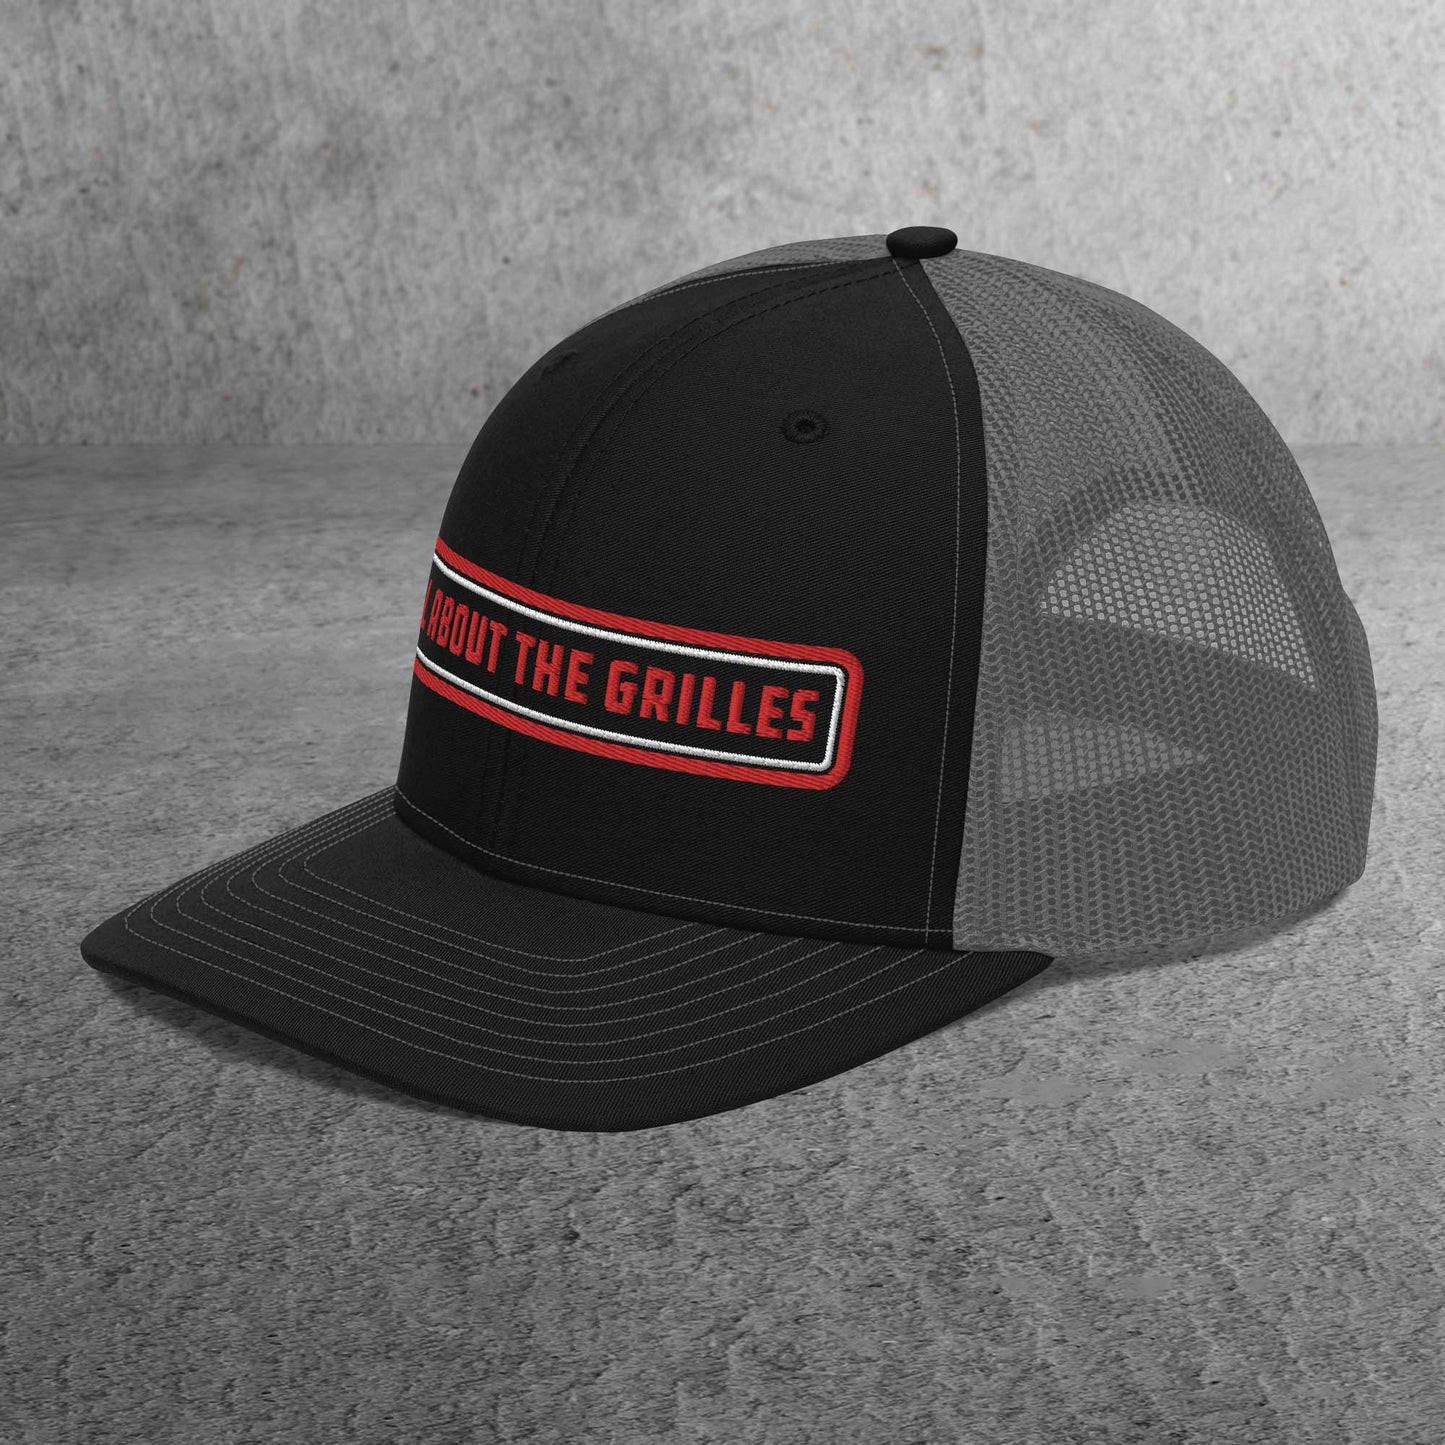 Trucker Cap | All About The Grilles